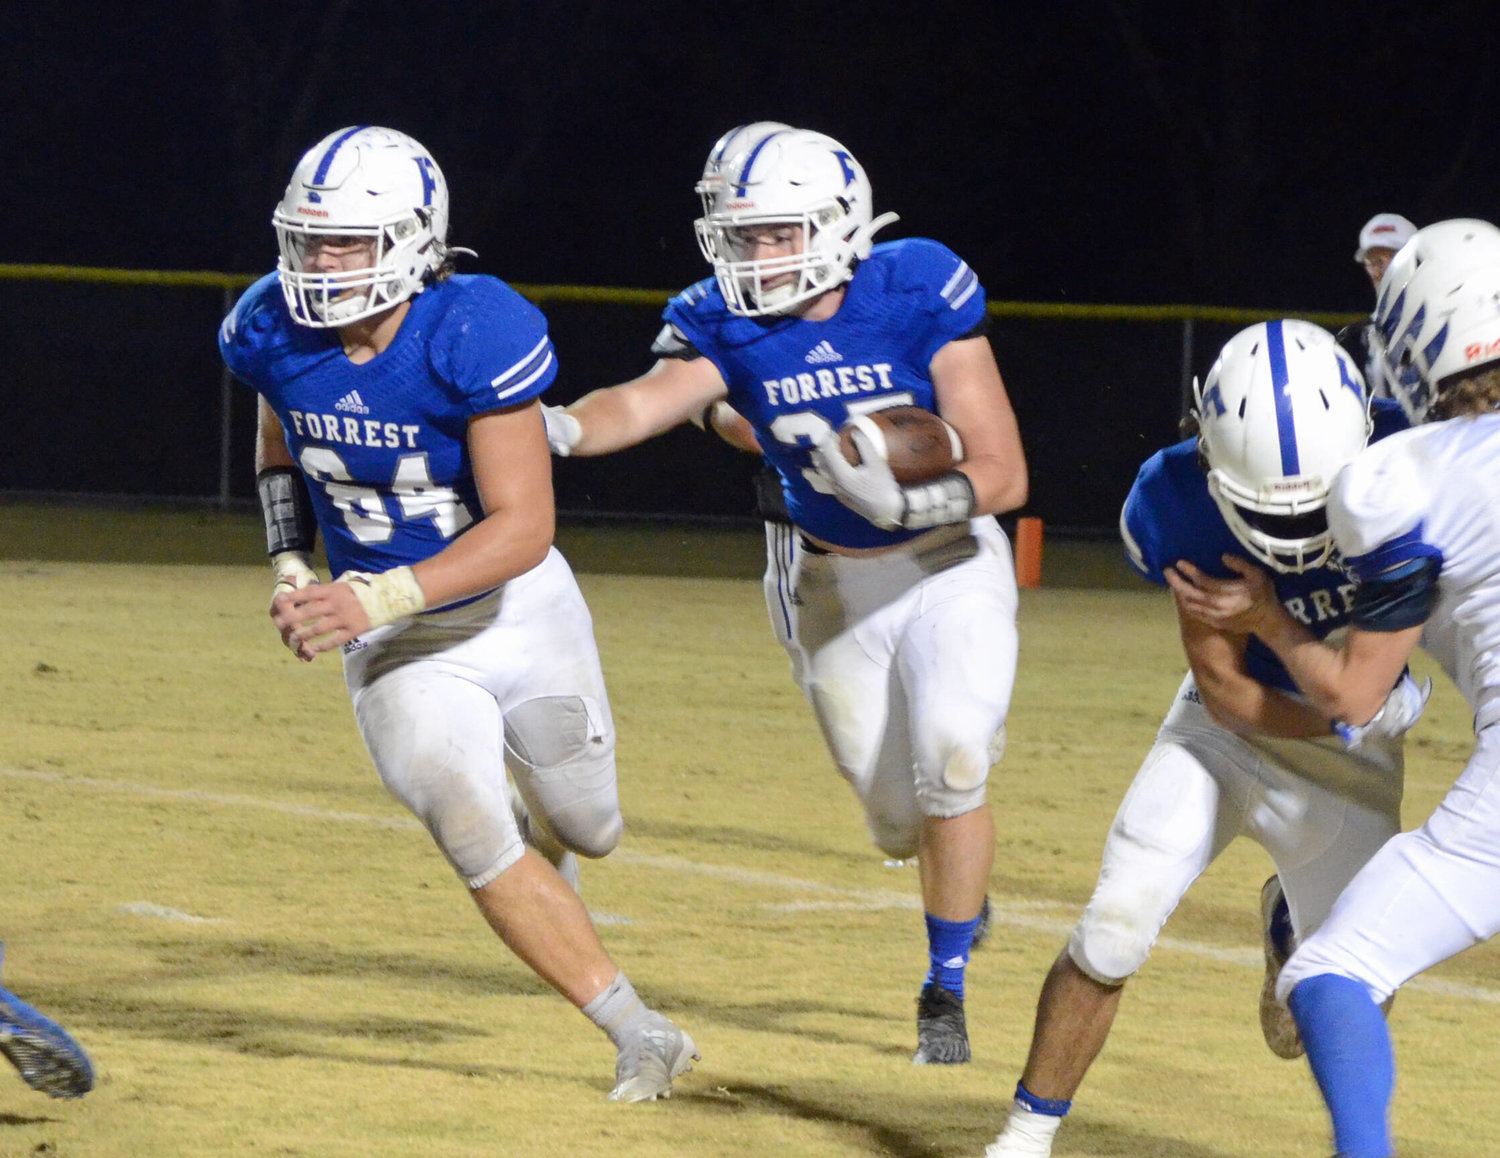 Forrest senior running back Joseph Whitaker (35), who had a career-high 118 yards on the ground, follows fellow senior Noah Hill (64) through a big hole in the Rockets’ dominating rushing performance versus the Eagles.